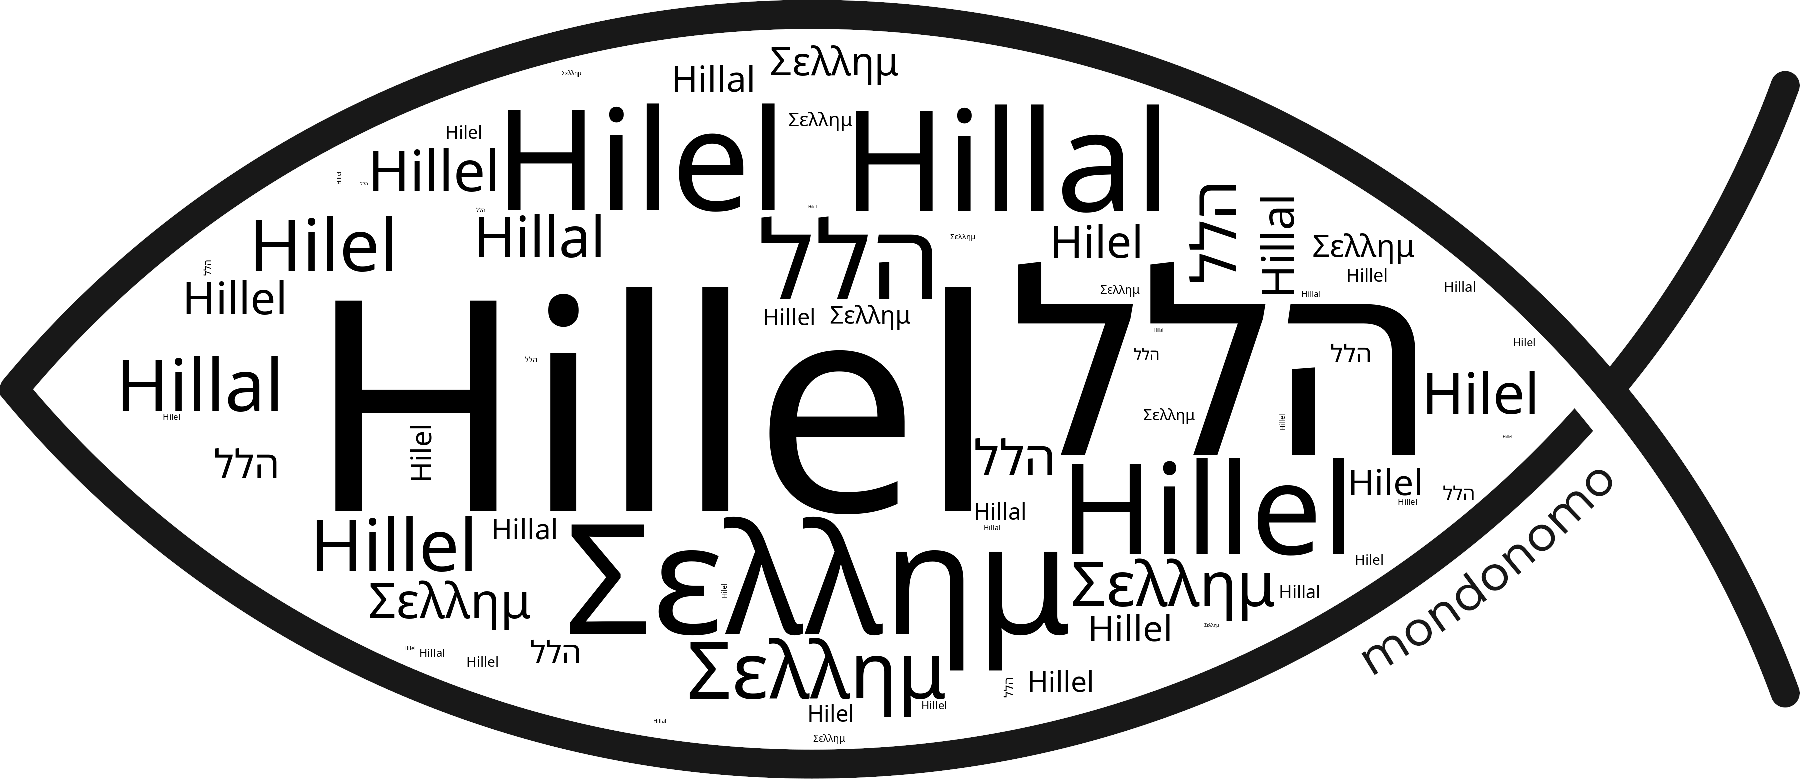 Name Hillel in the world's Bibles